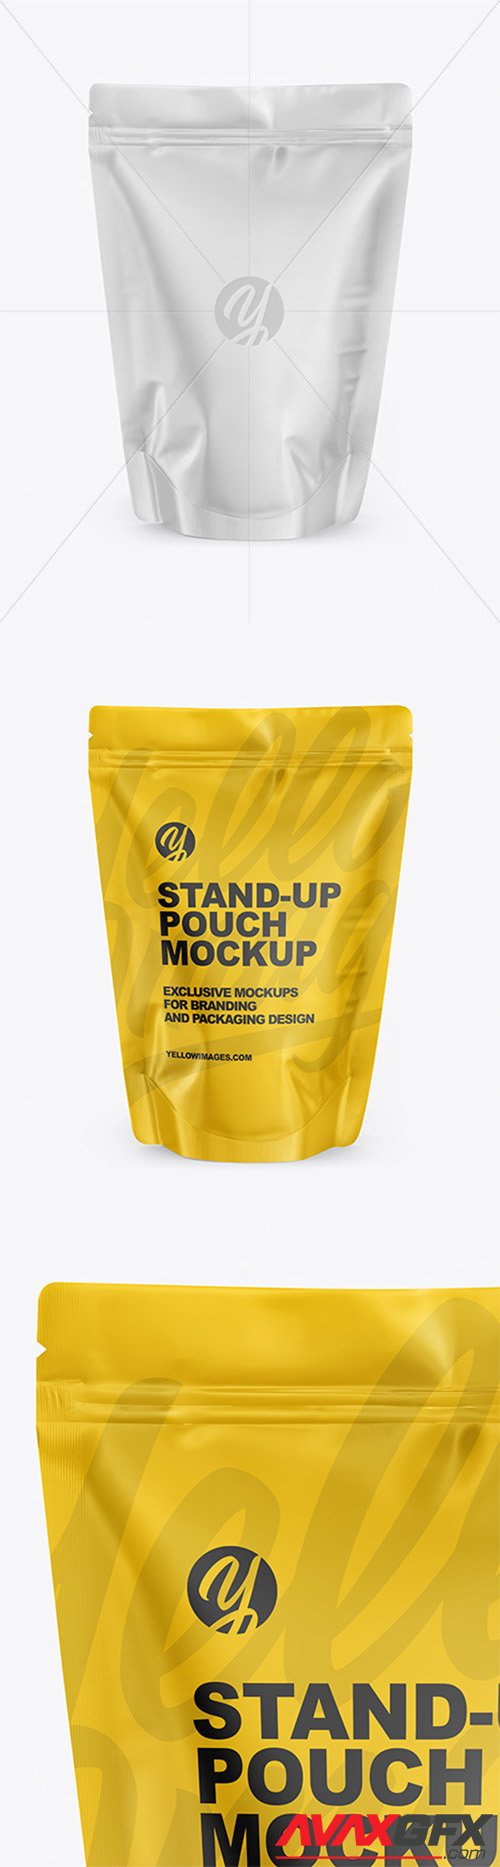 Download Stand Up Pouch Mockup Set Avaxgfx All Downloads That You Need In One Place Graphic From Nitroflare Rapidgator Yellowimages Mockups